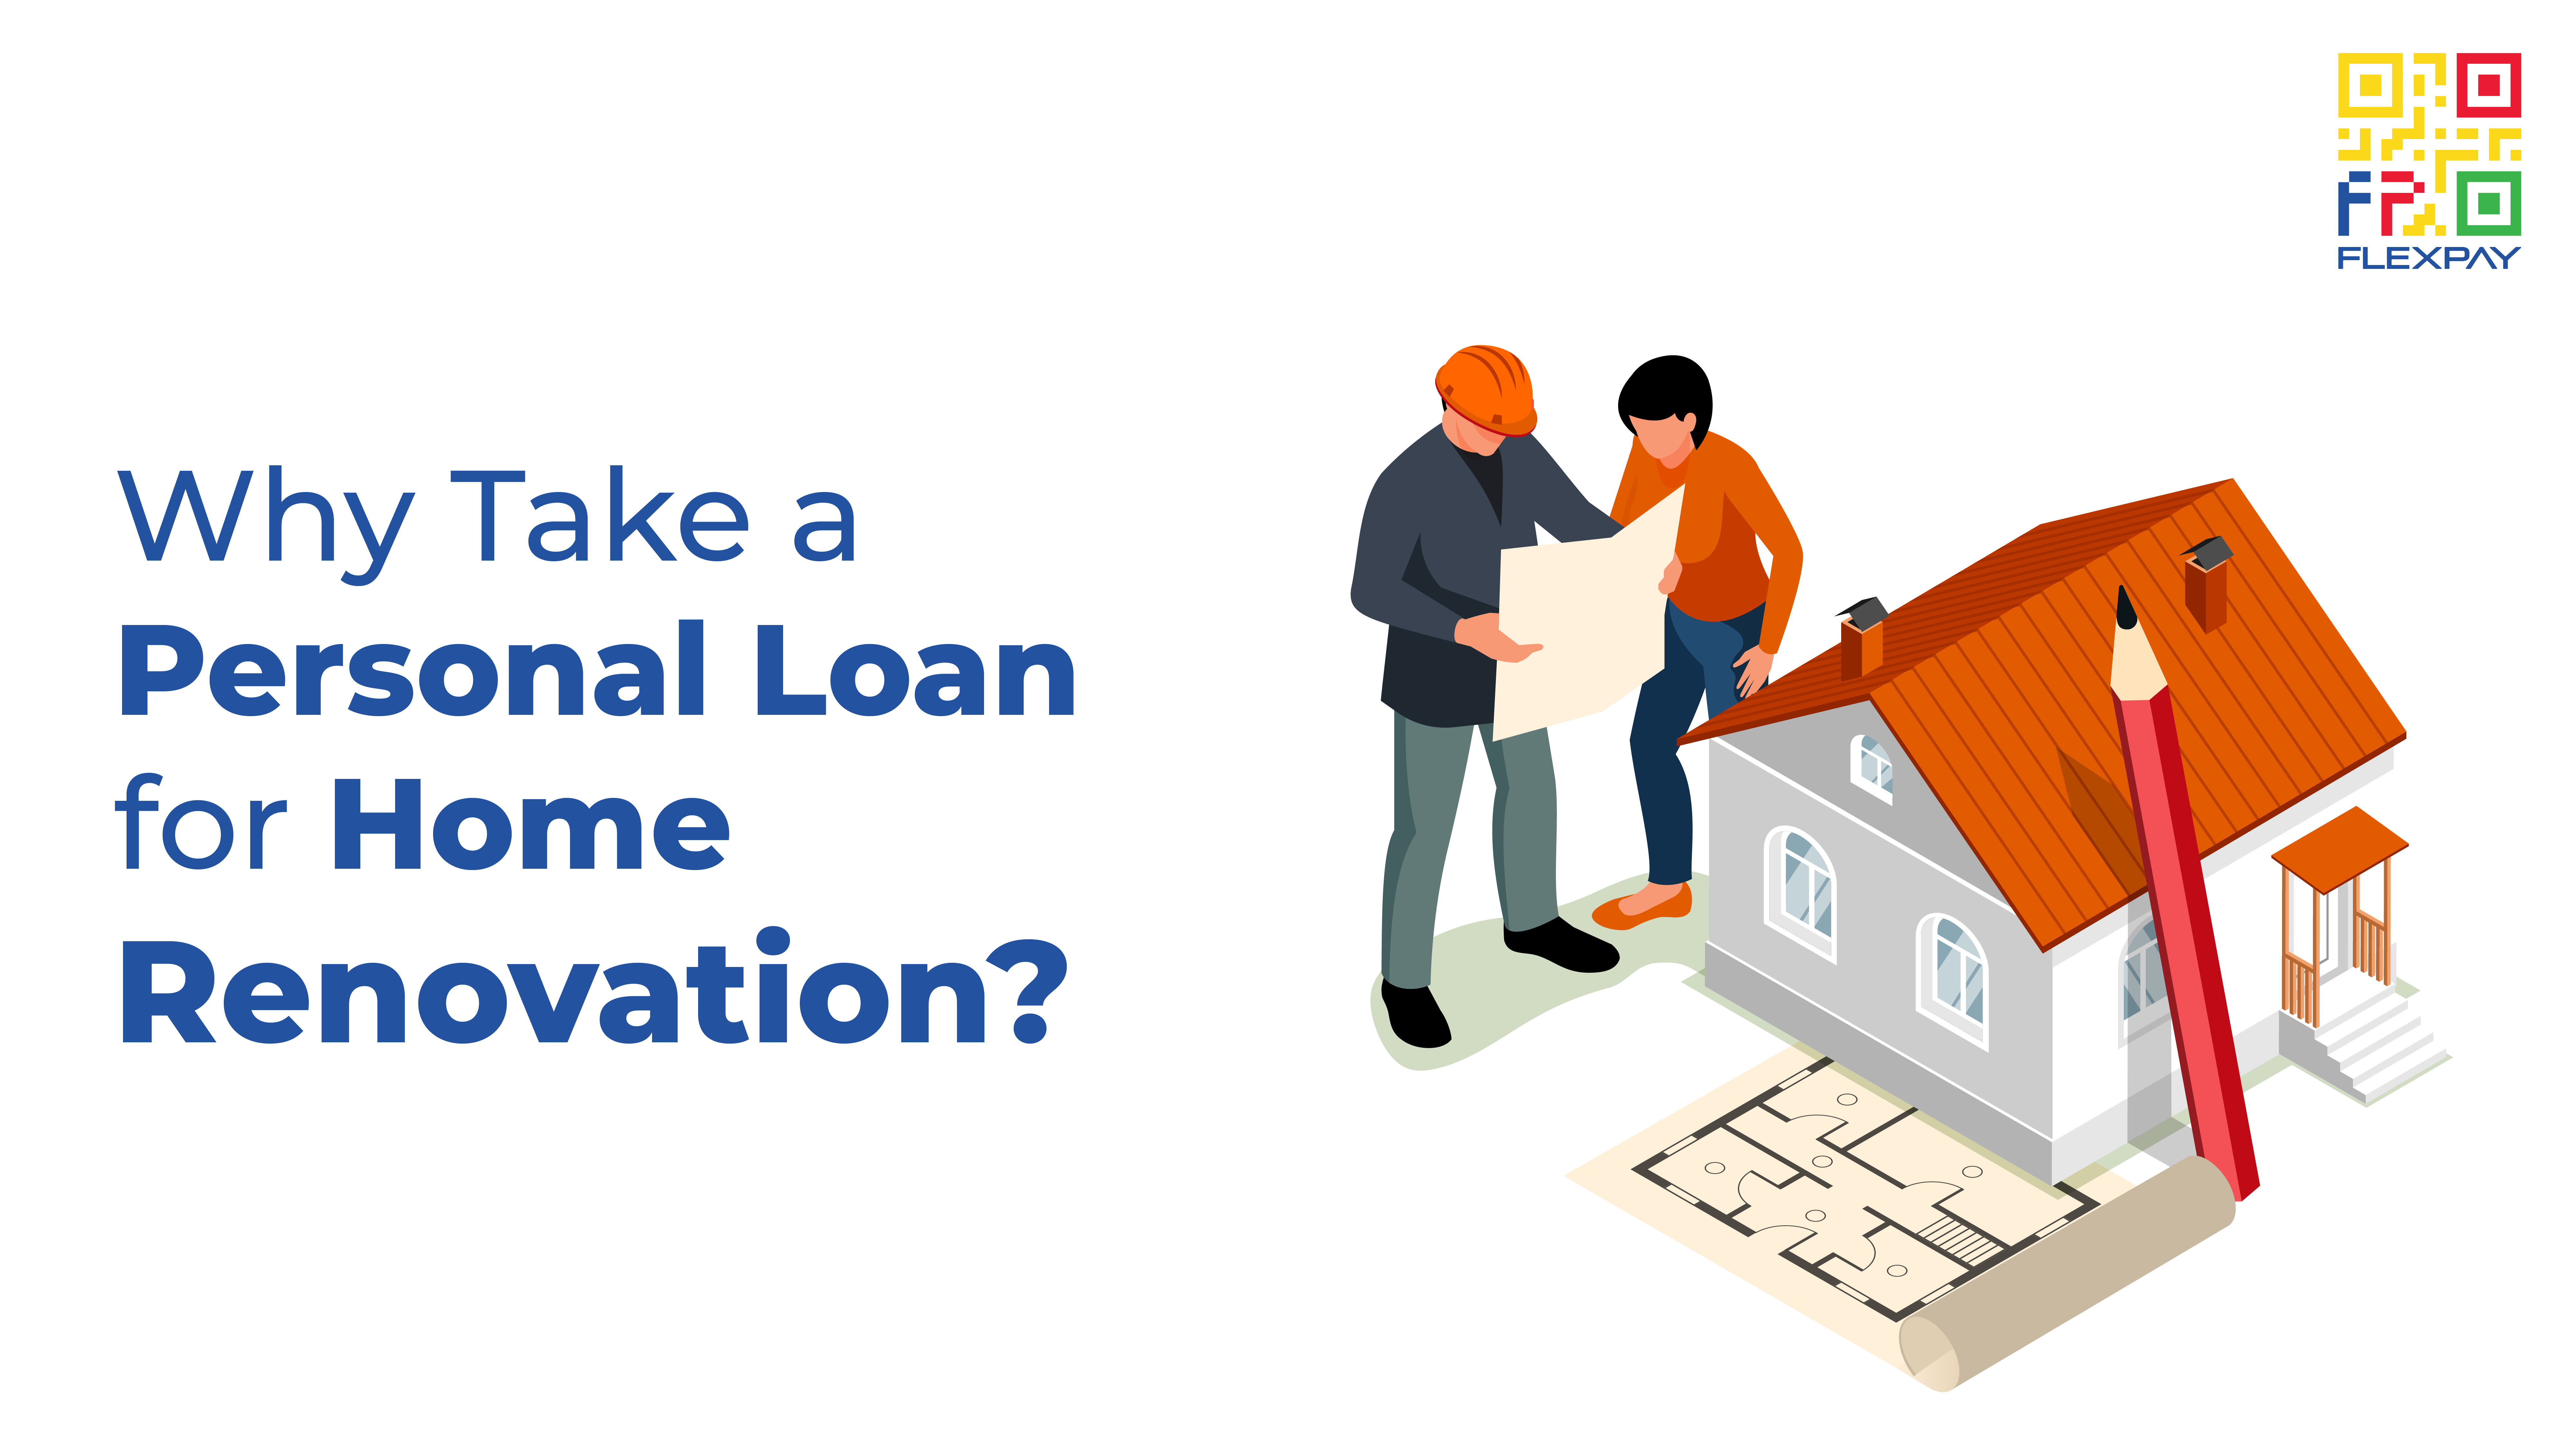 Why Take a Personal Loan for Home Renovation